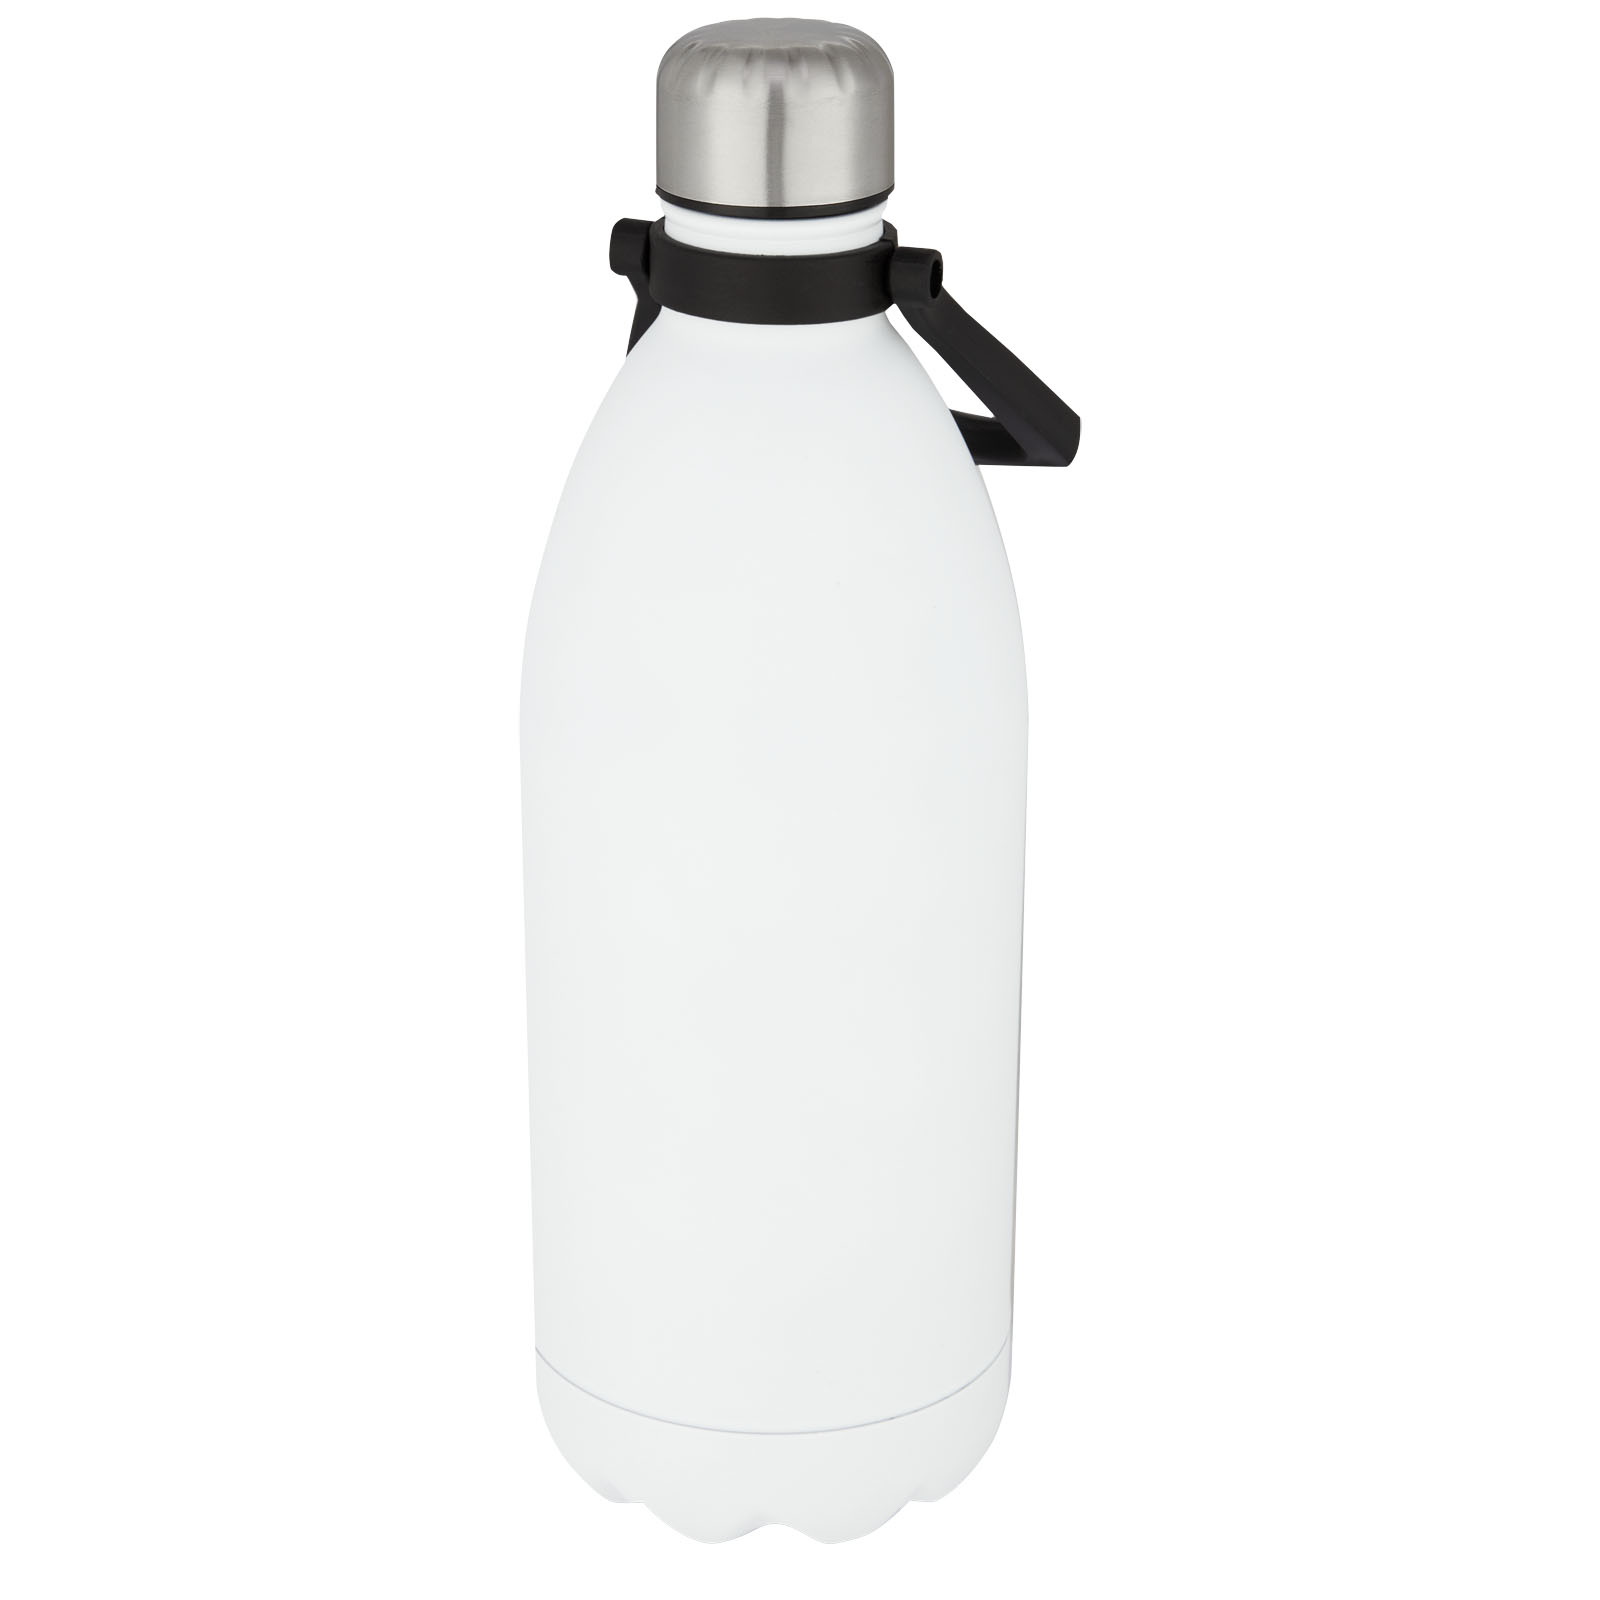 Drinkware - Cove 1.5 L vacuum insulated stainless steel bottle